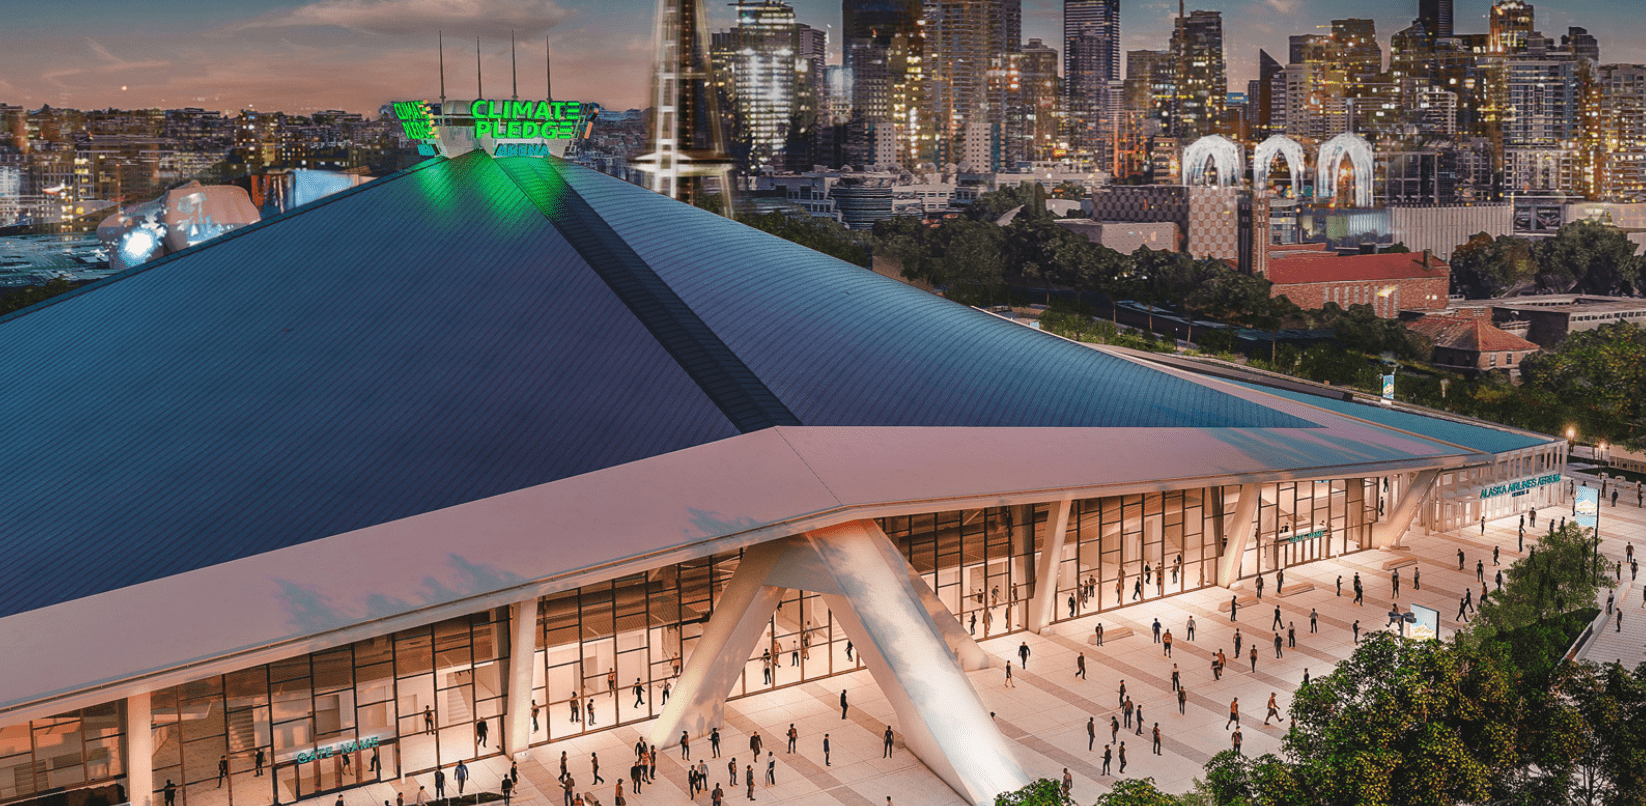 An artist's rendering of the new Climate Pledge Arena at the Seattle Center. The new arena can be seen in the late evening, with many people walking outdoors along the concourse. Downtown Seattle skyscrapers are visible in the background.